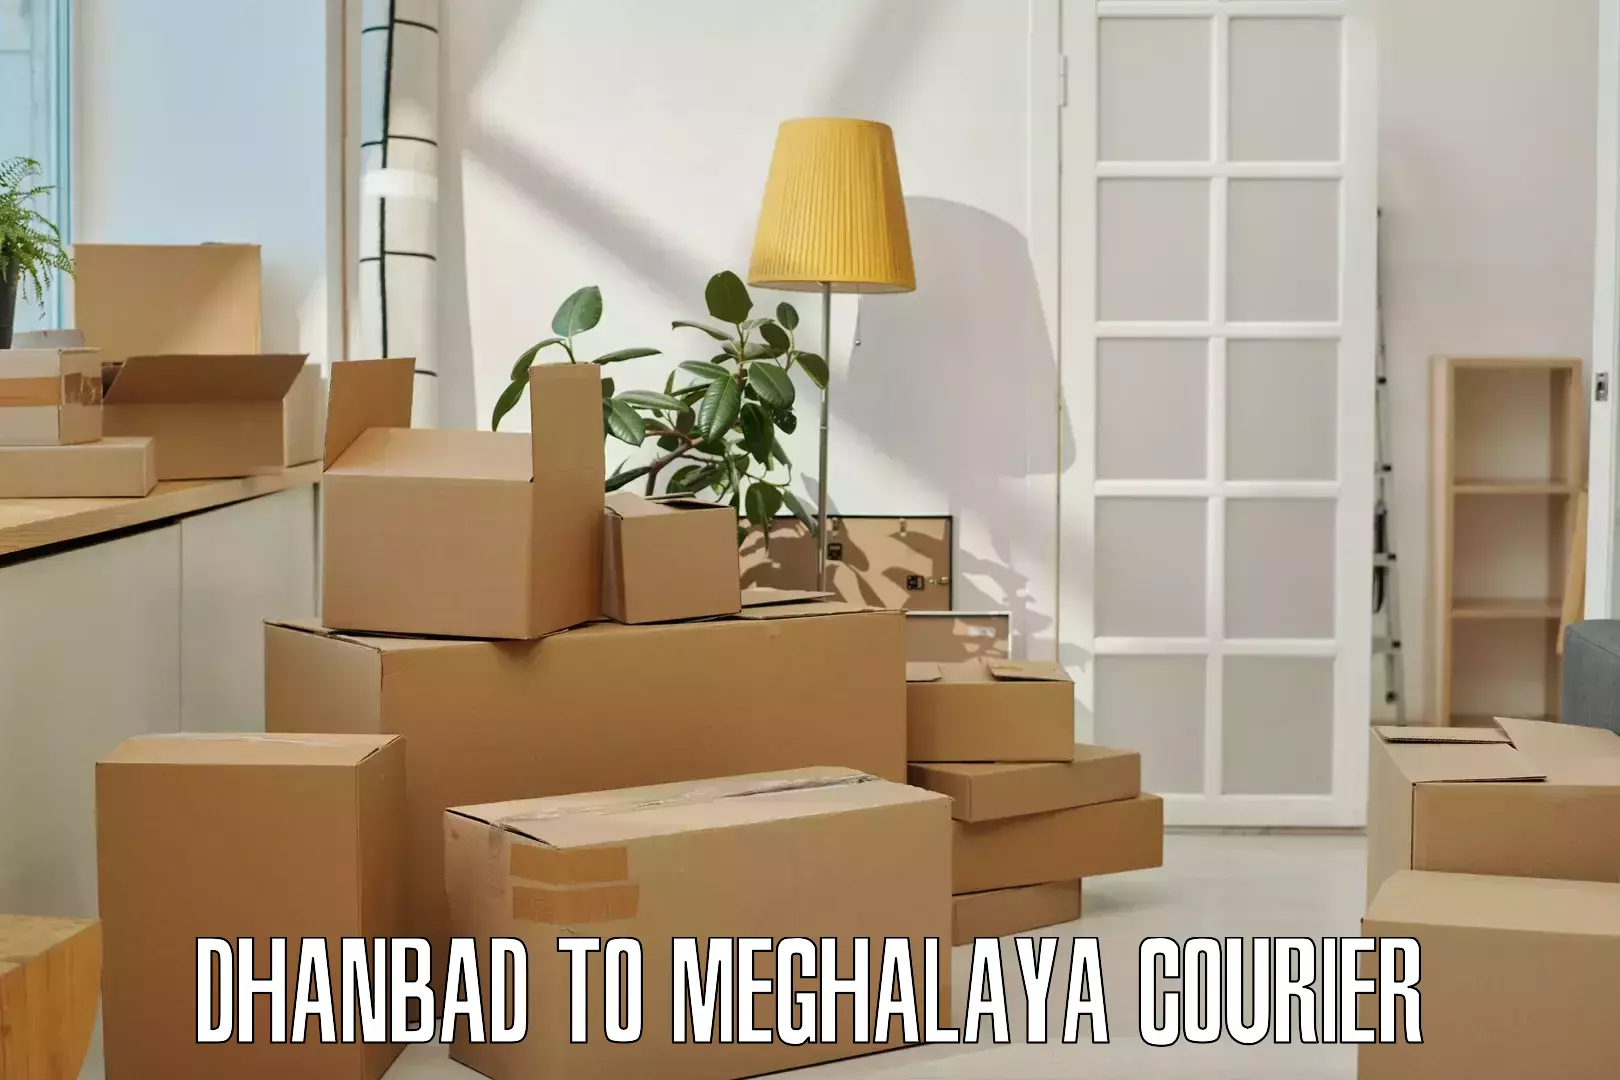 Efficient freight service Dhanbad to Meghalaya